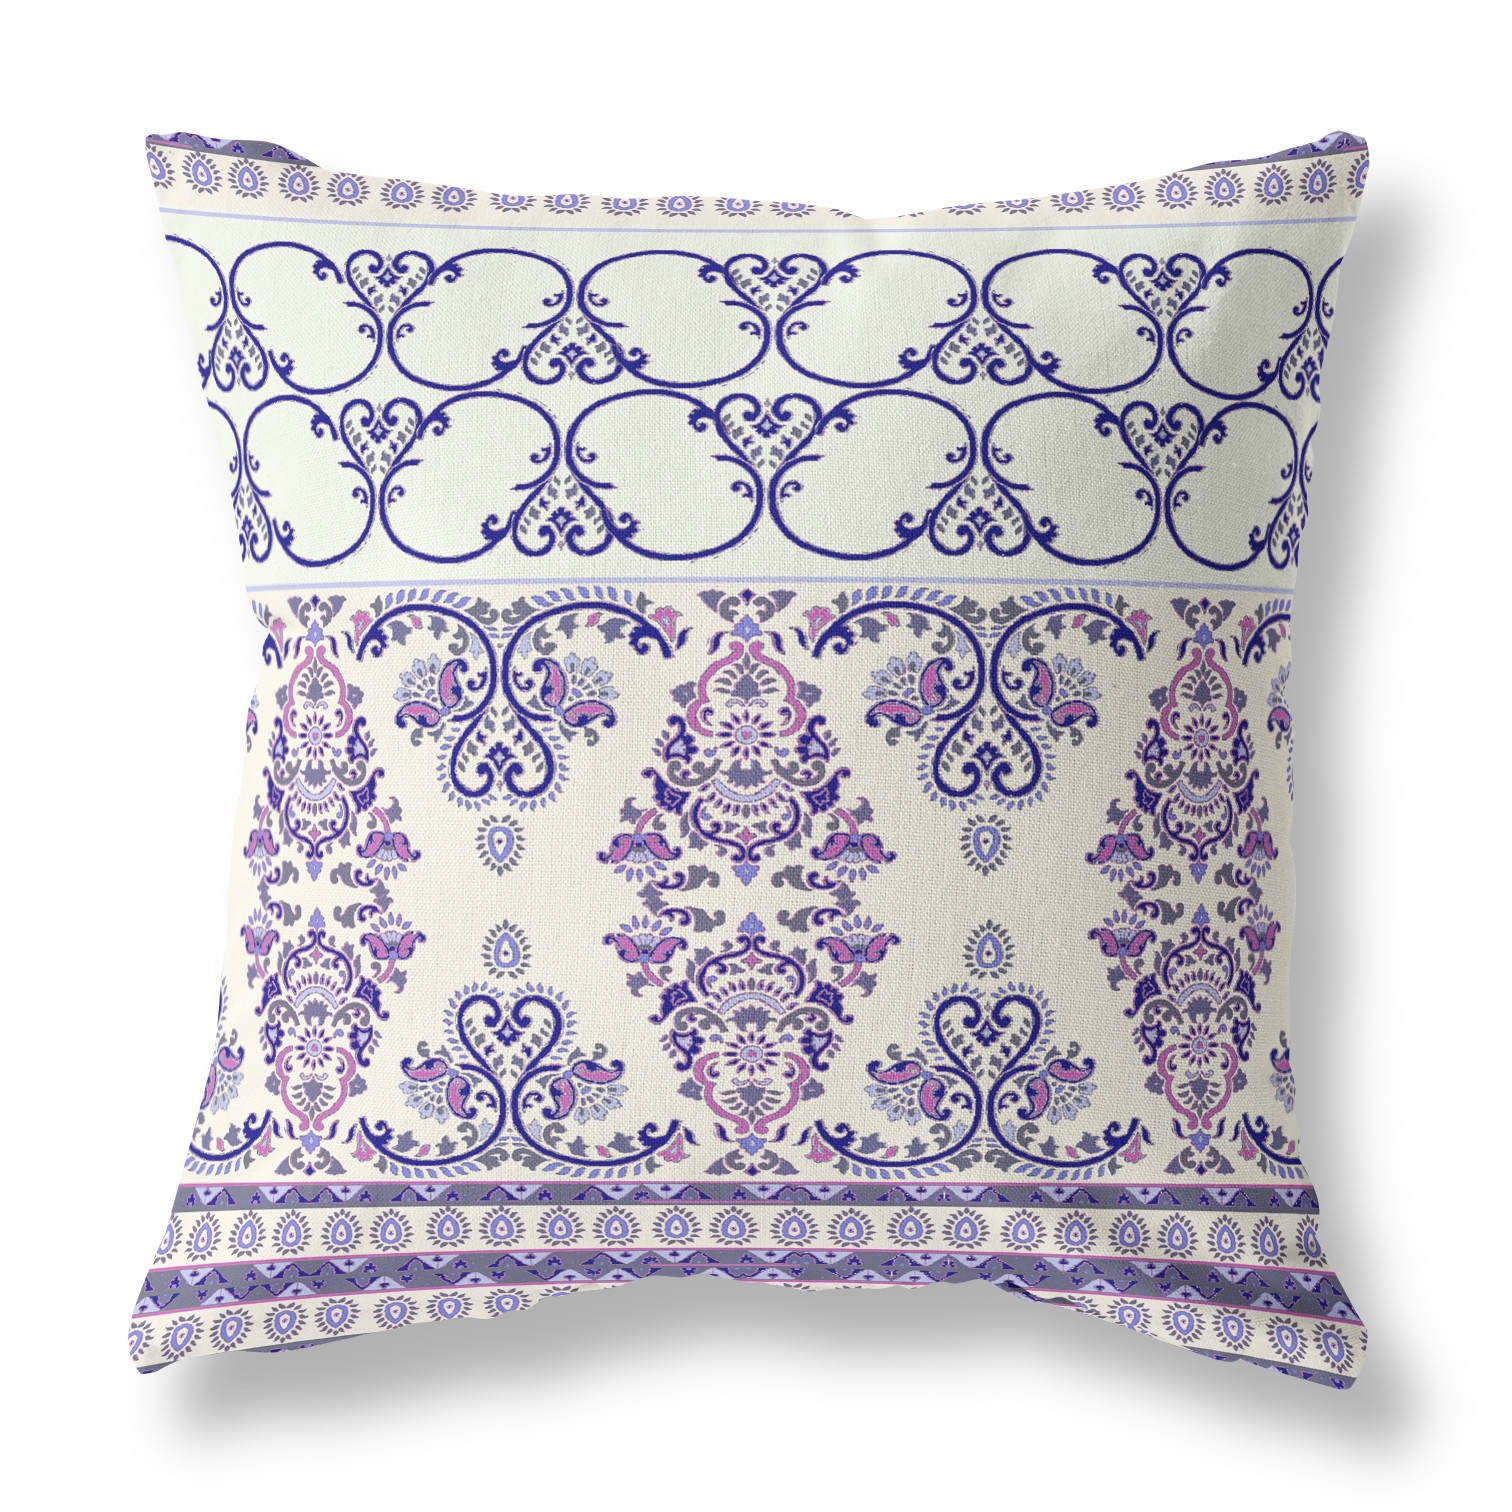 20" X 20" White And Purple Broadcloth Floral Throw Pillow-470675-1